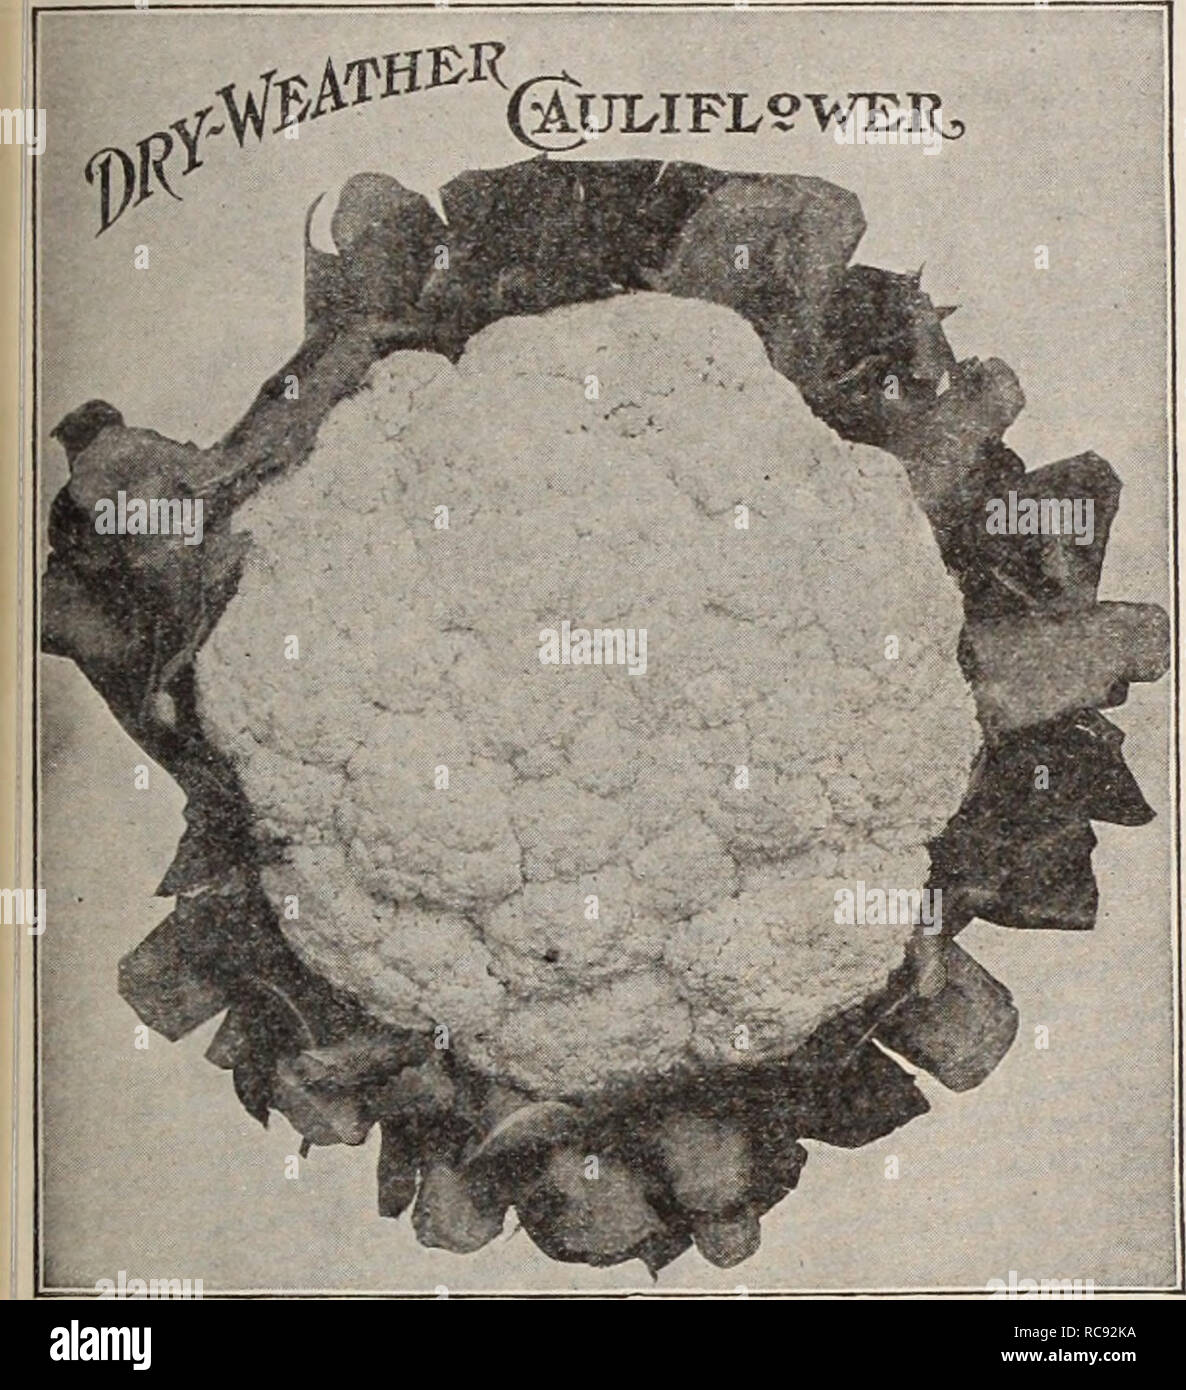 . Dreer's garden book / Henry A. Dreer.. Nursery Catalogue. i RELIABLE VEGETABLE SEED// -PHMDEIJM 19 CAULIFLOWER Blumenkohl, Ger. Chou-fleur, Fr. Coliflor, Sp. One ounce of seed will produce about 2000 plants. CULTURE —For earliest Cauliflower, raise plants by sowing in hotbed or greenhouse during January or February, and transplant to flats or cold frames, 2 or 3 inches apart each way. Set in open ground as soon in spring as the land can be put in good order. Soil to be a warm, very rich, fibrous loam, well supplied with humus and moisture. Copious water applications during dry weather, espec Stock Photo